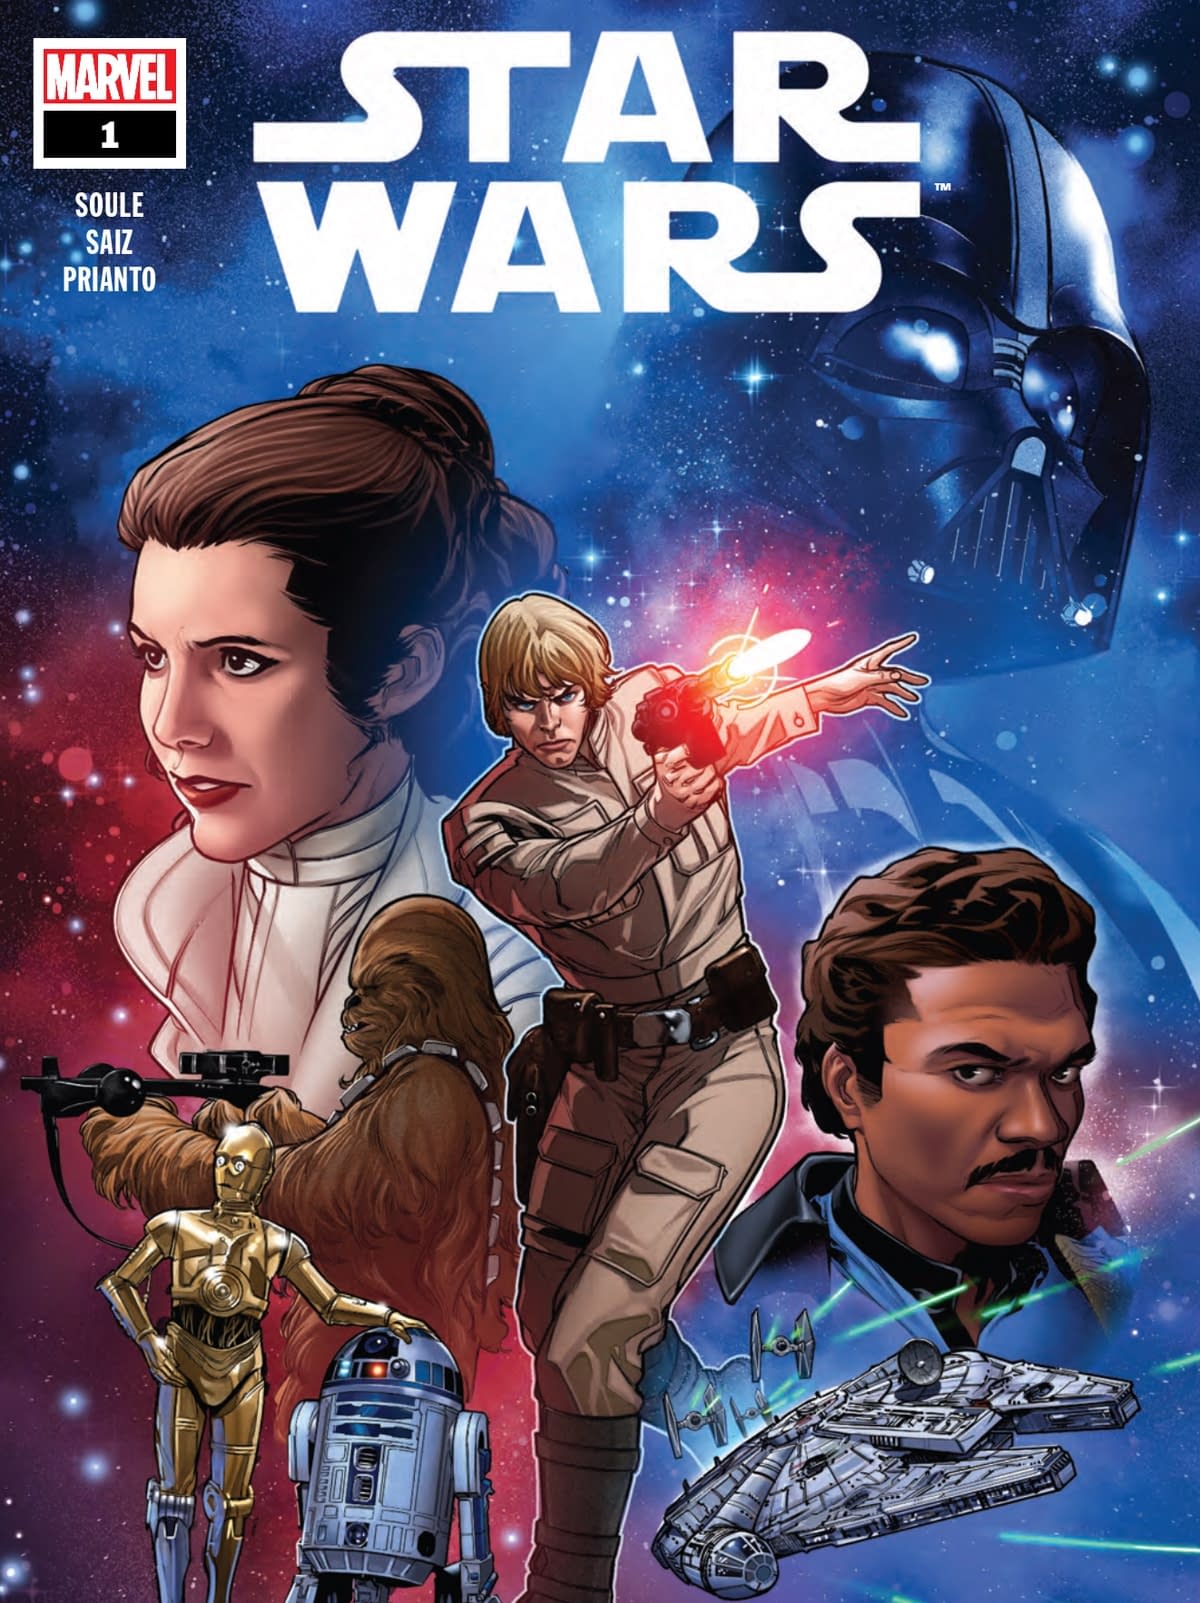 REVIEW: Star Wars #1 -- "The Stakes Aren't That High"